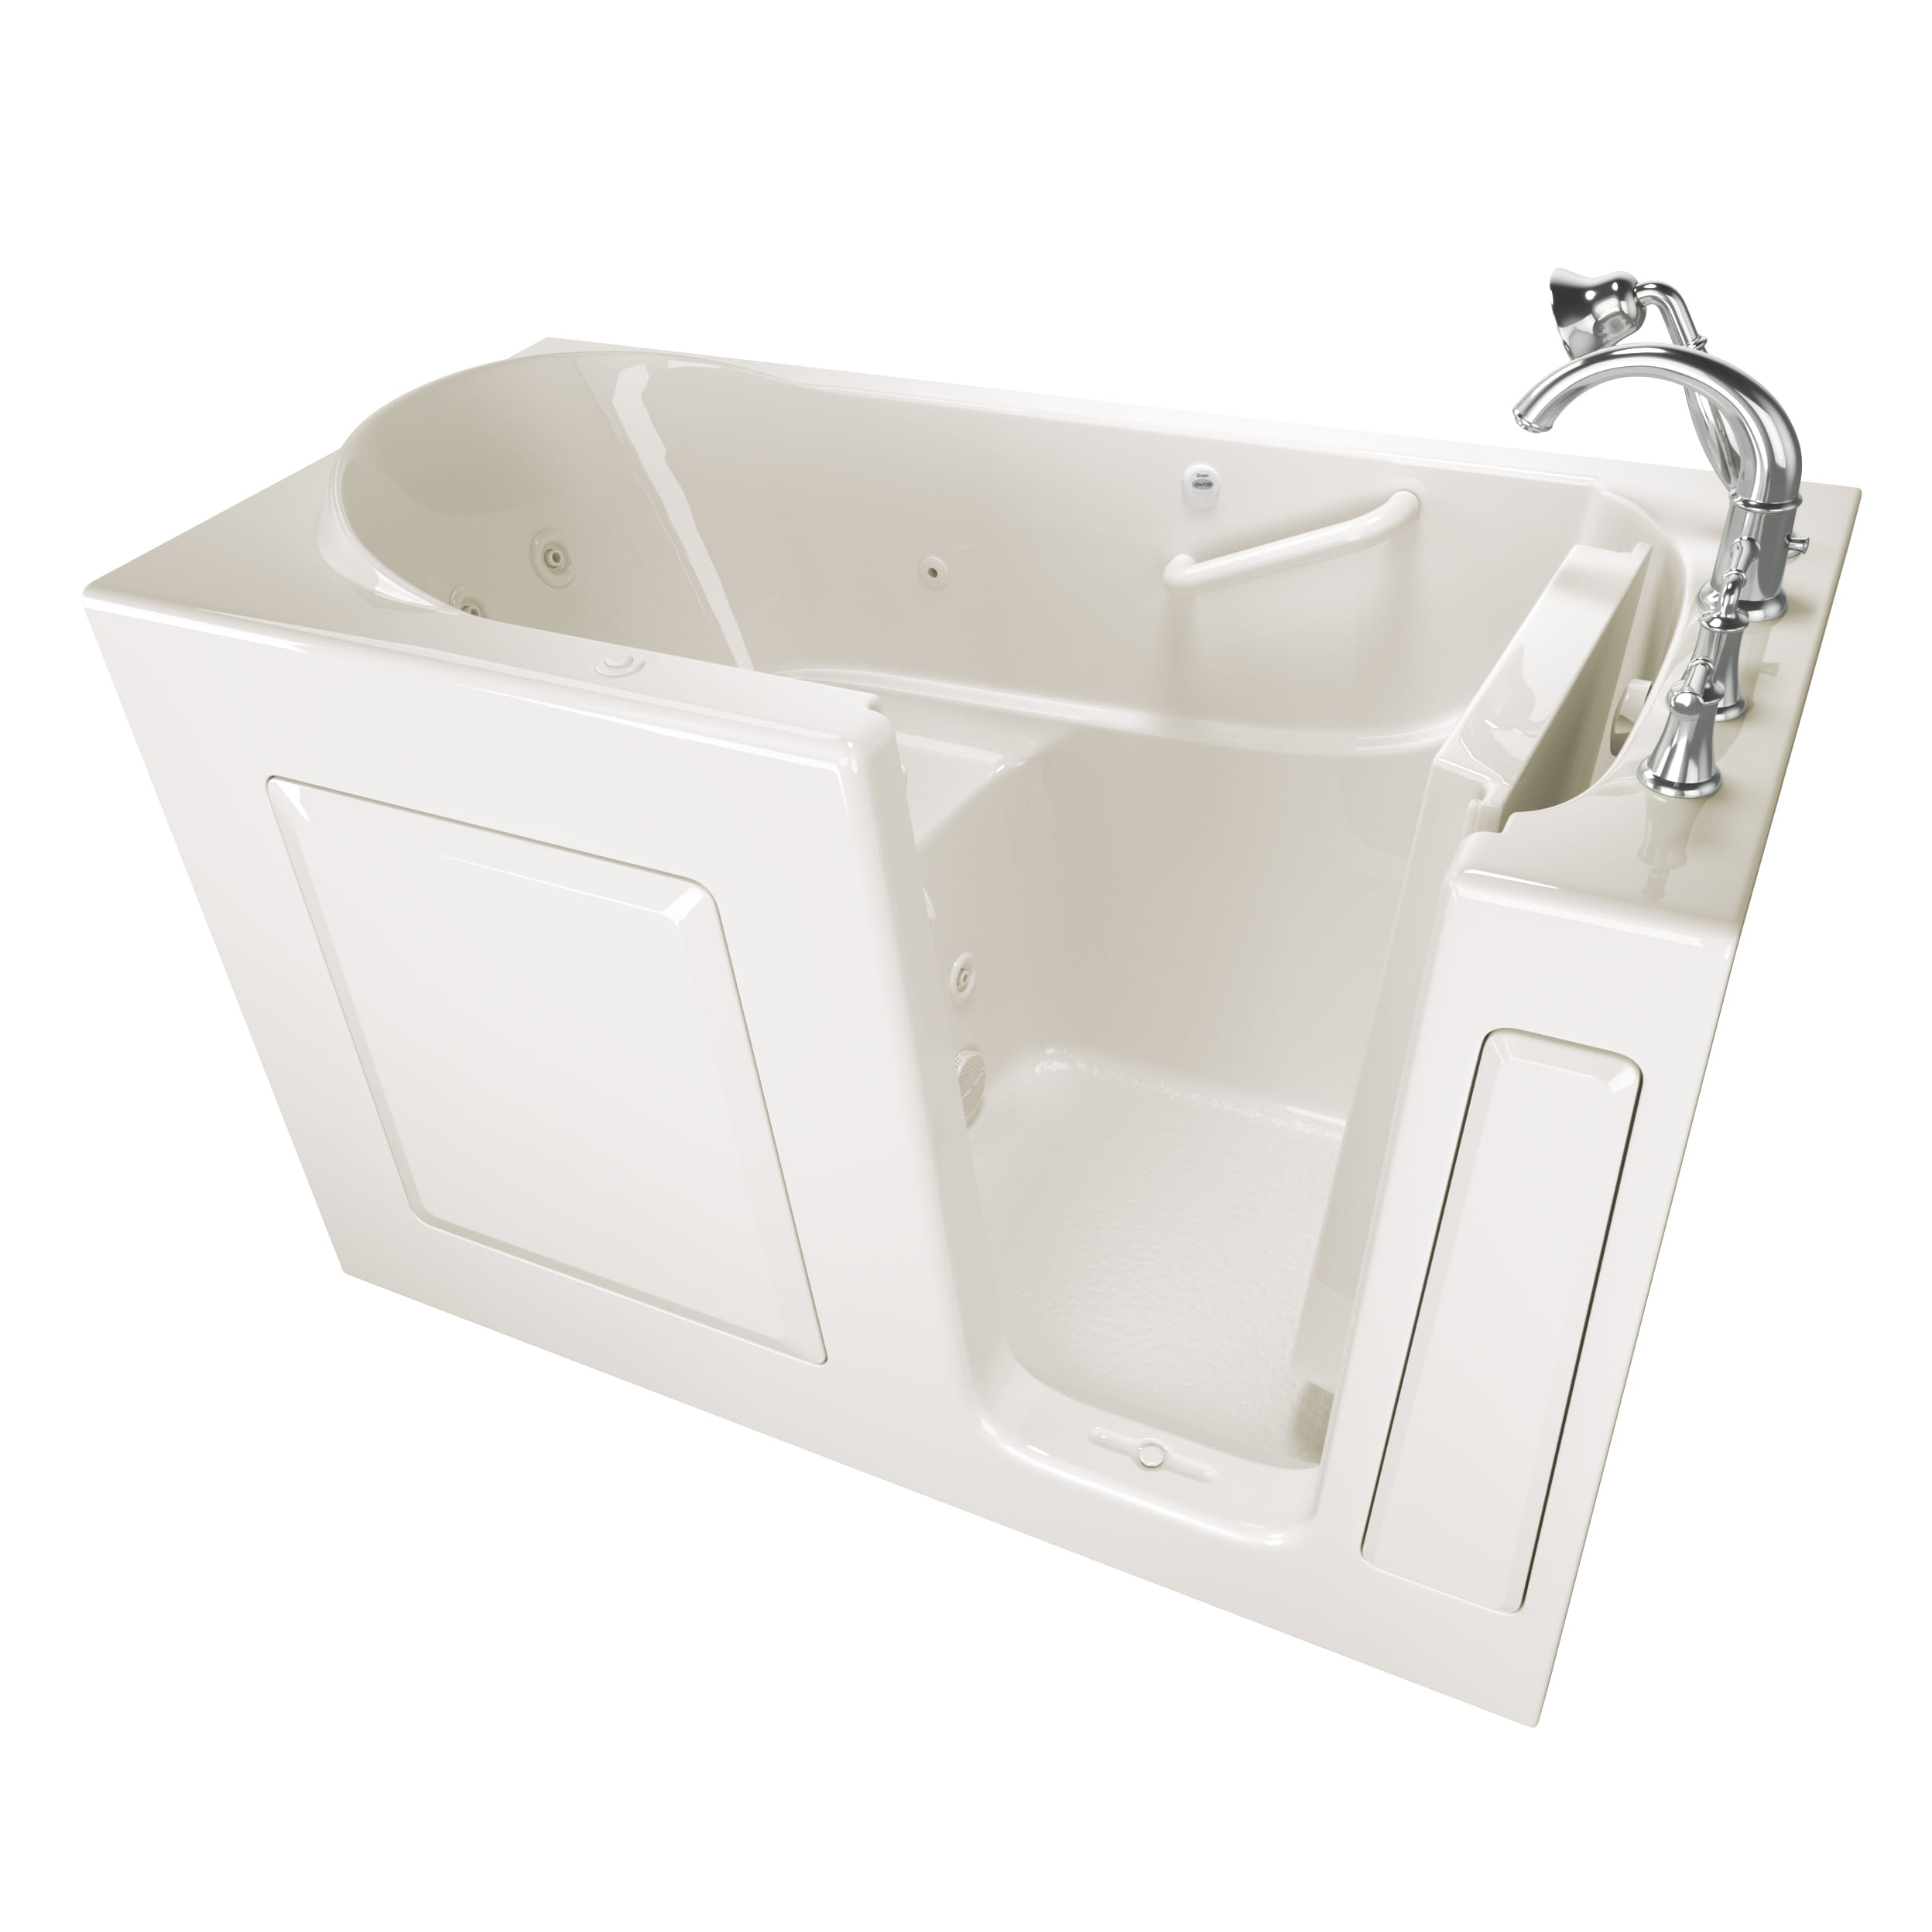 Gelcoat Value Series 30 x 60  Inch Walk in Tub With Whirlpool System   Right Hand Drain With Faucet WIB LINEN